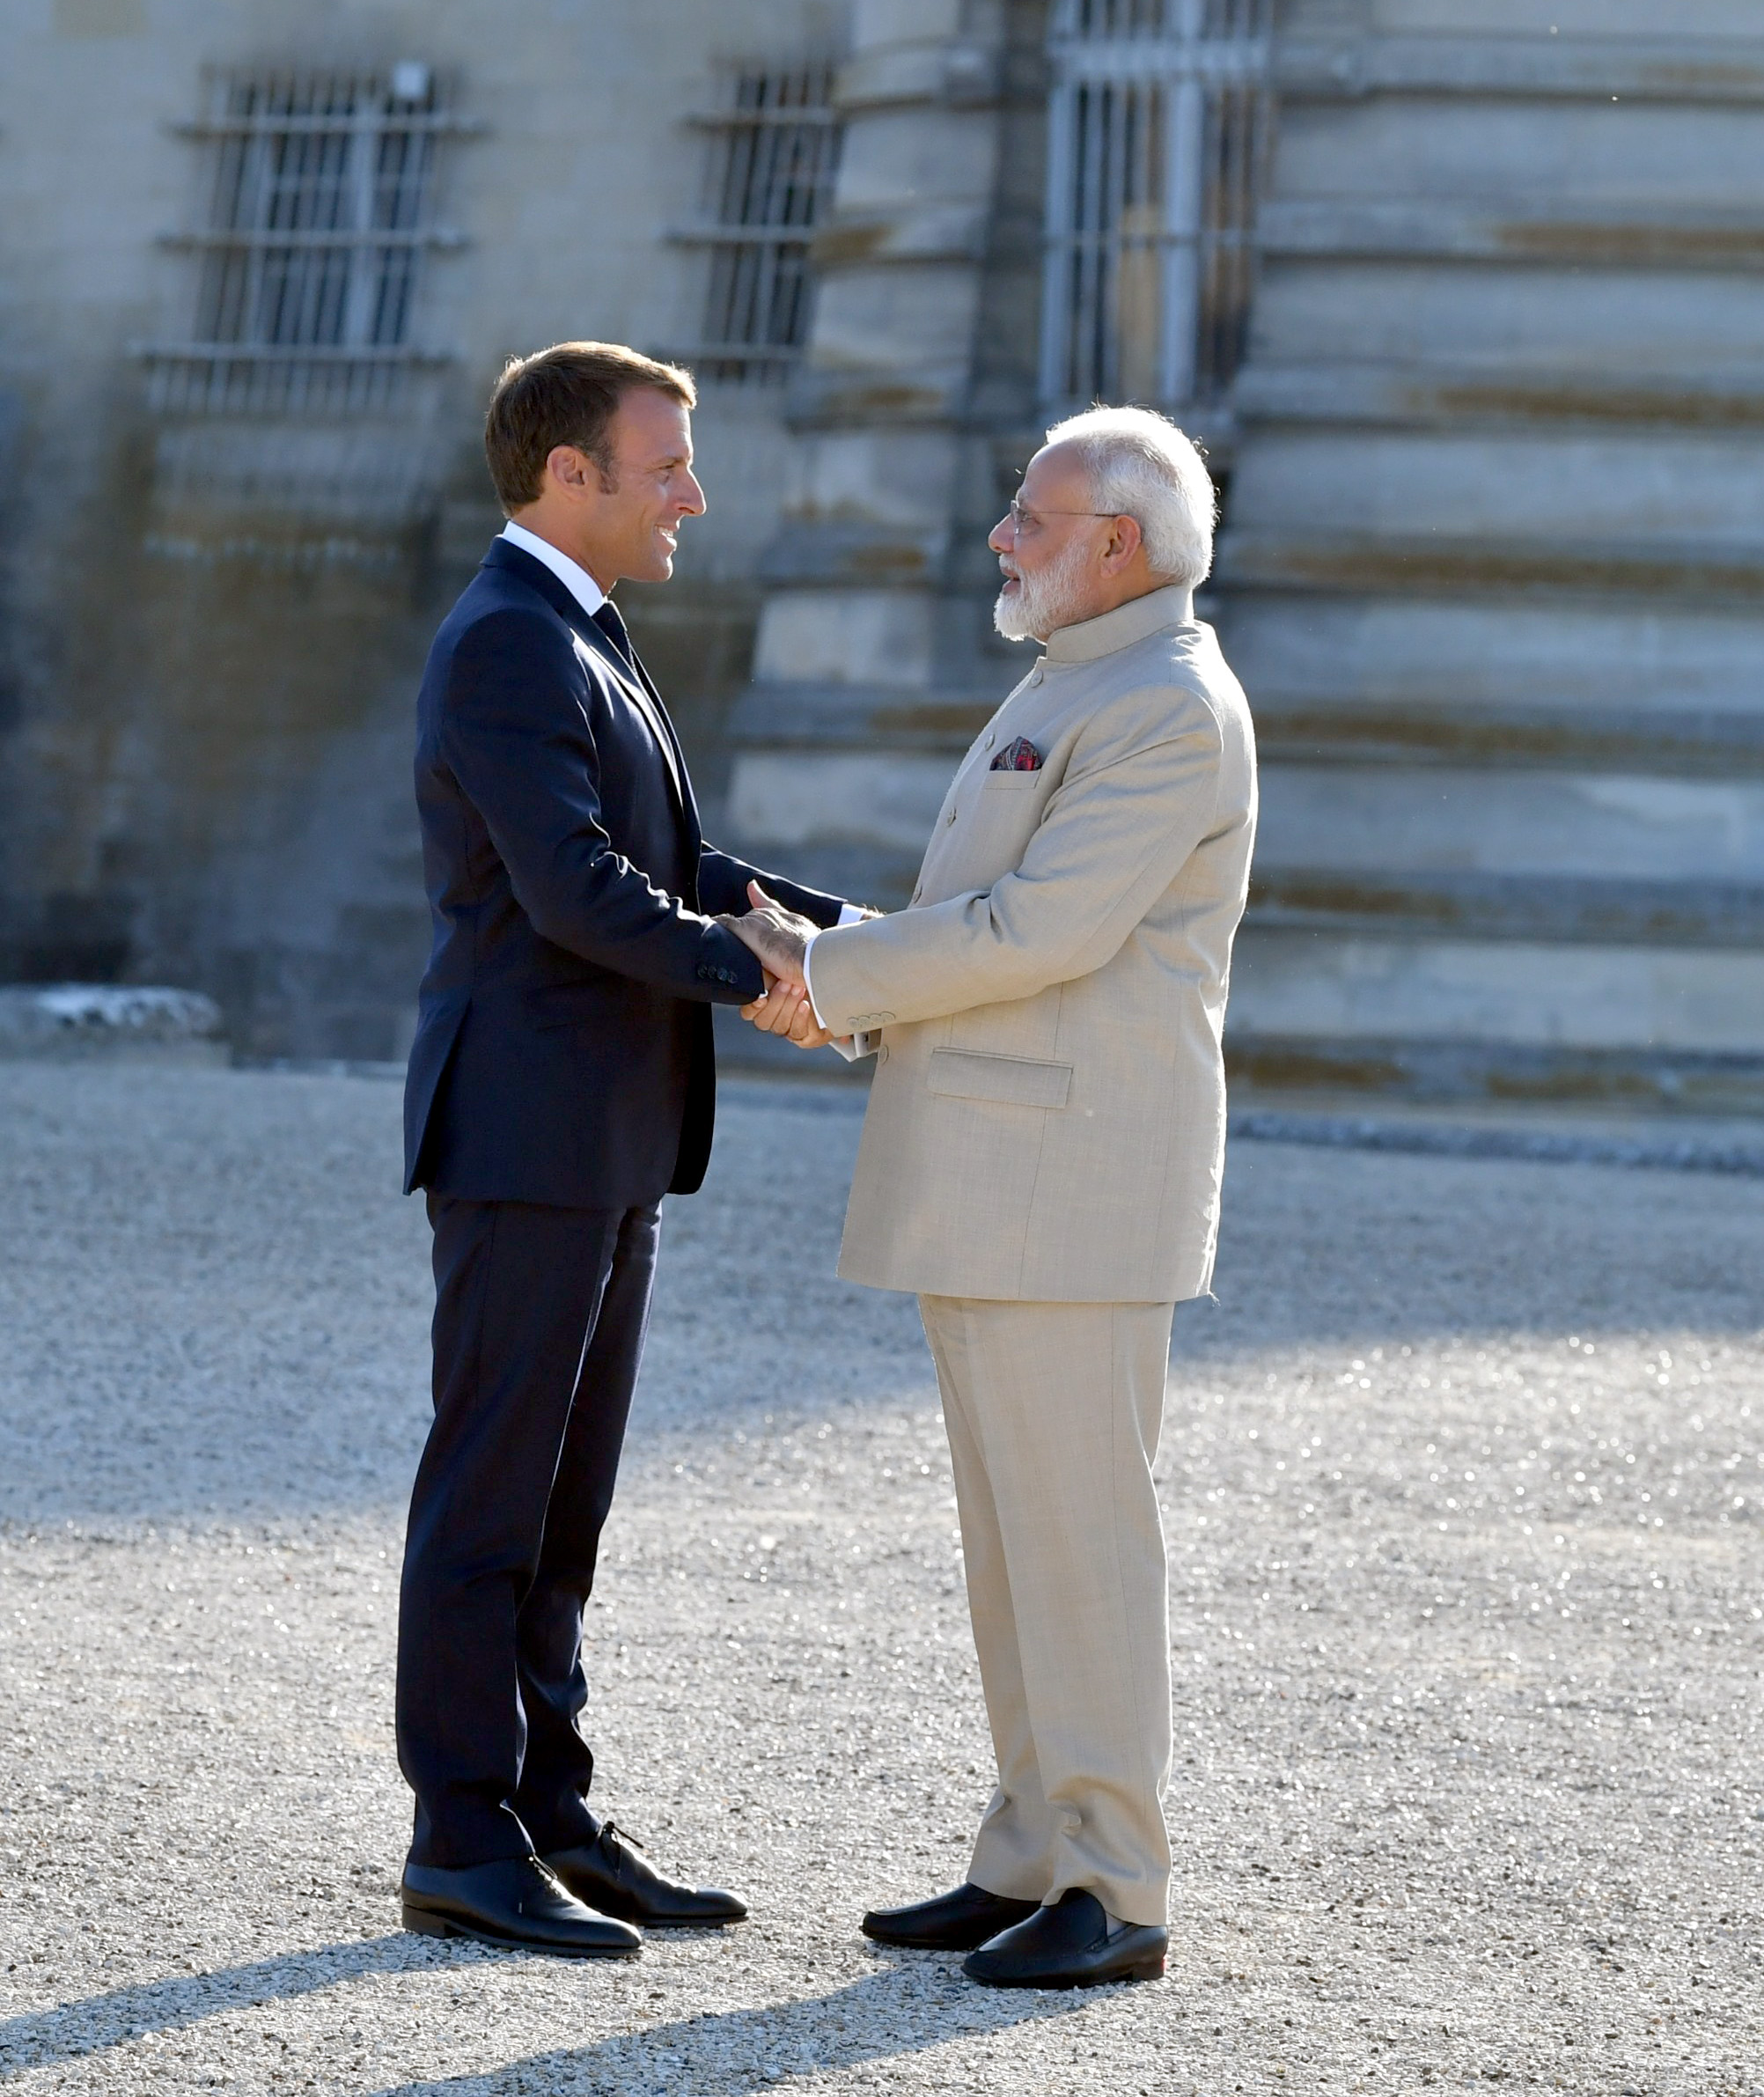 India-France friendship is unbreakable: Modi